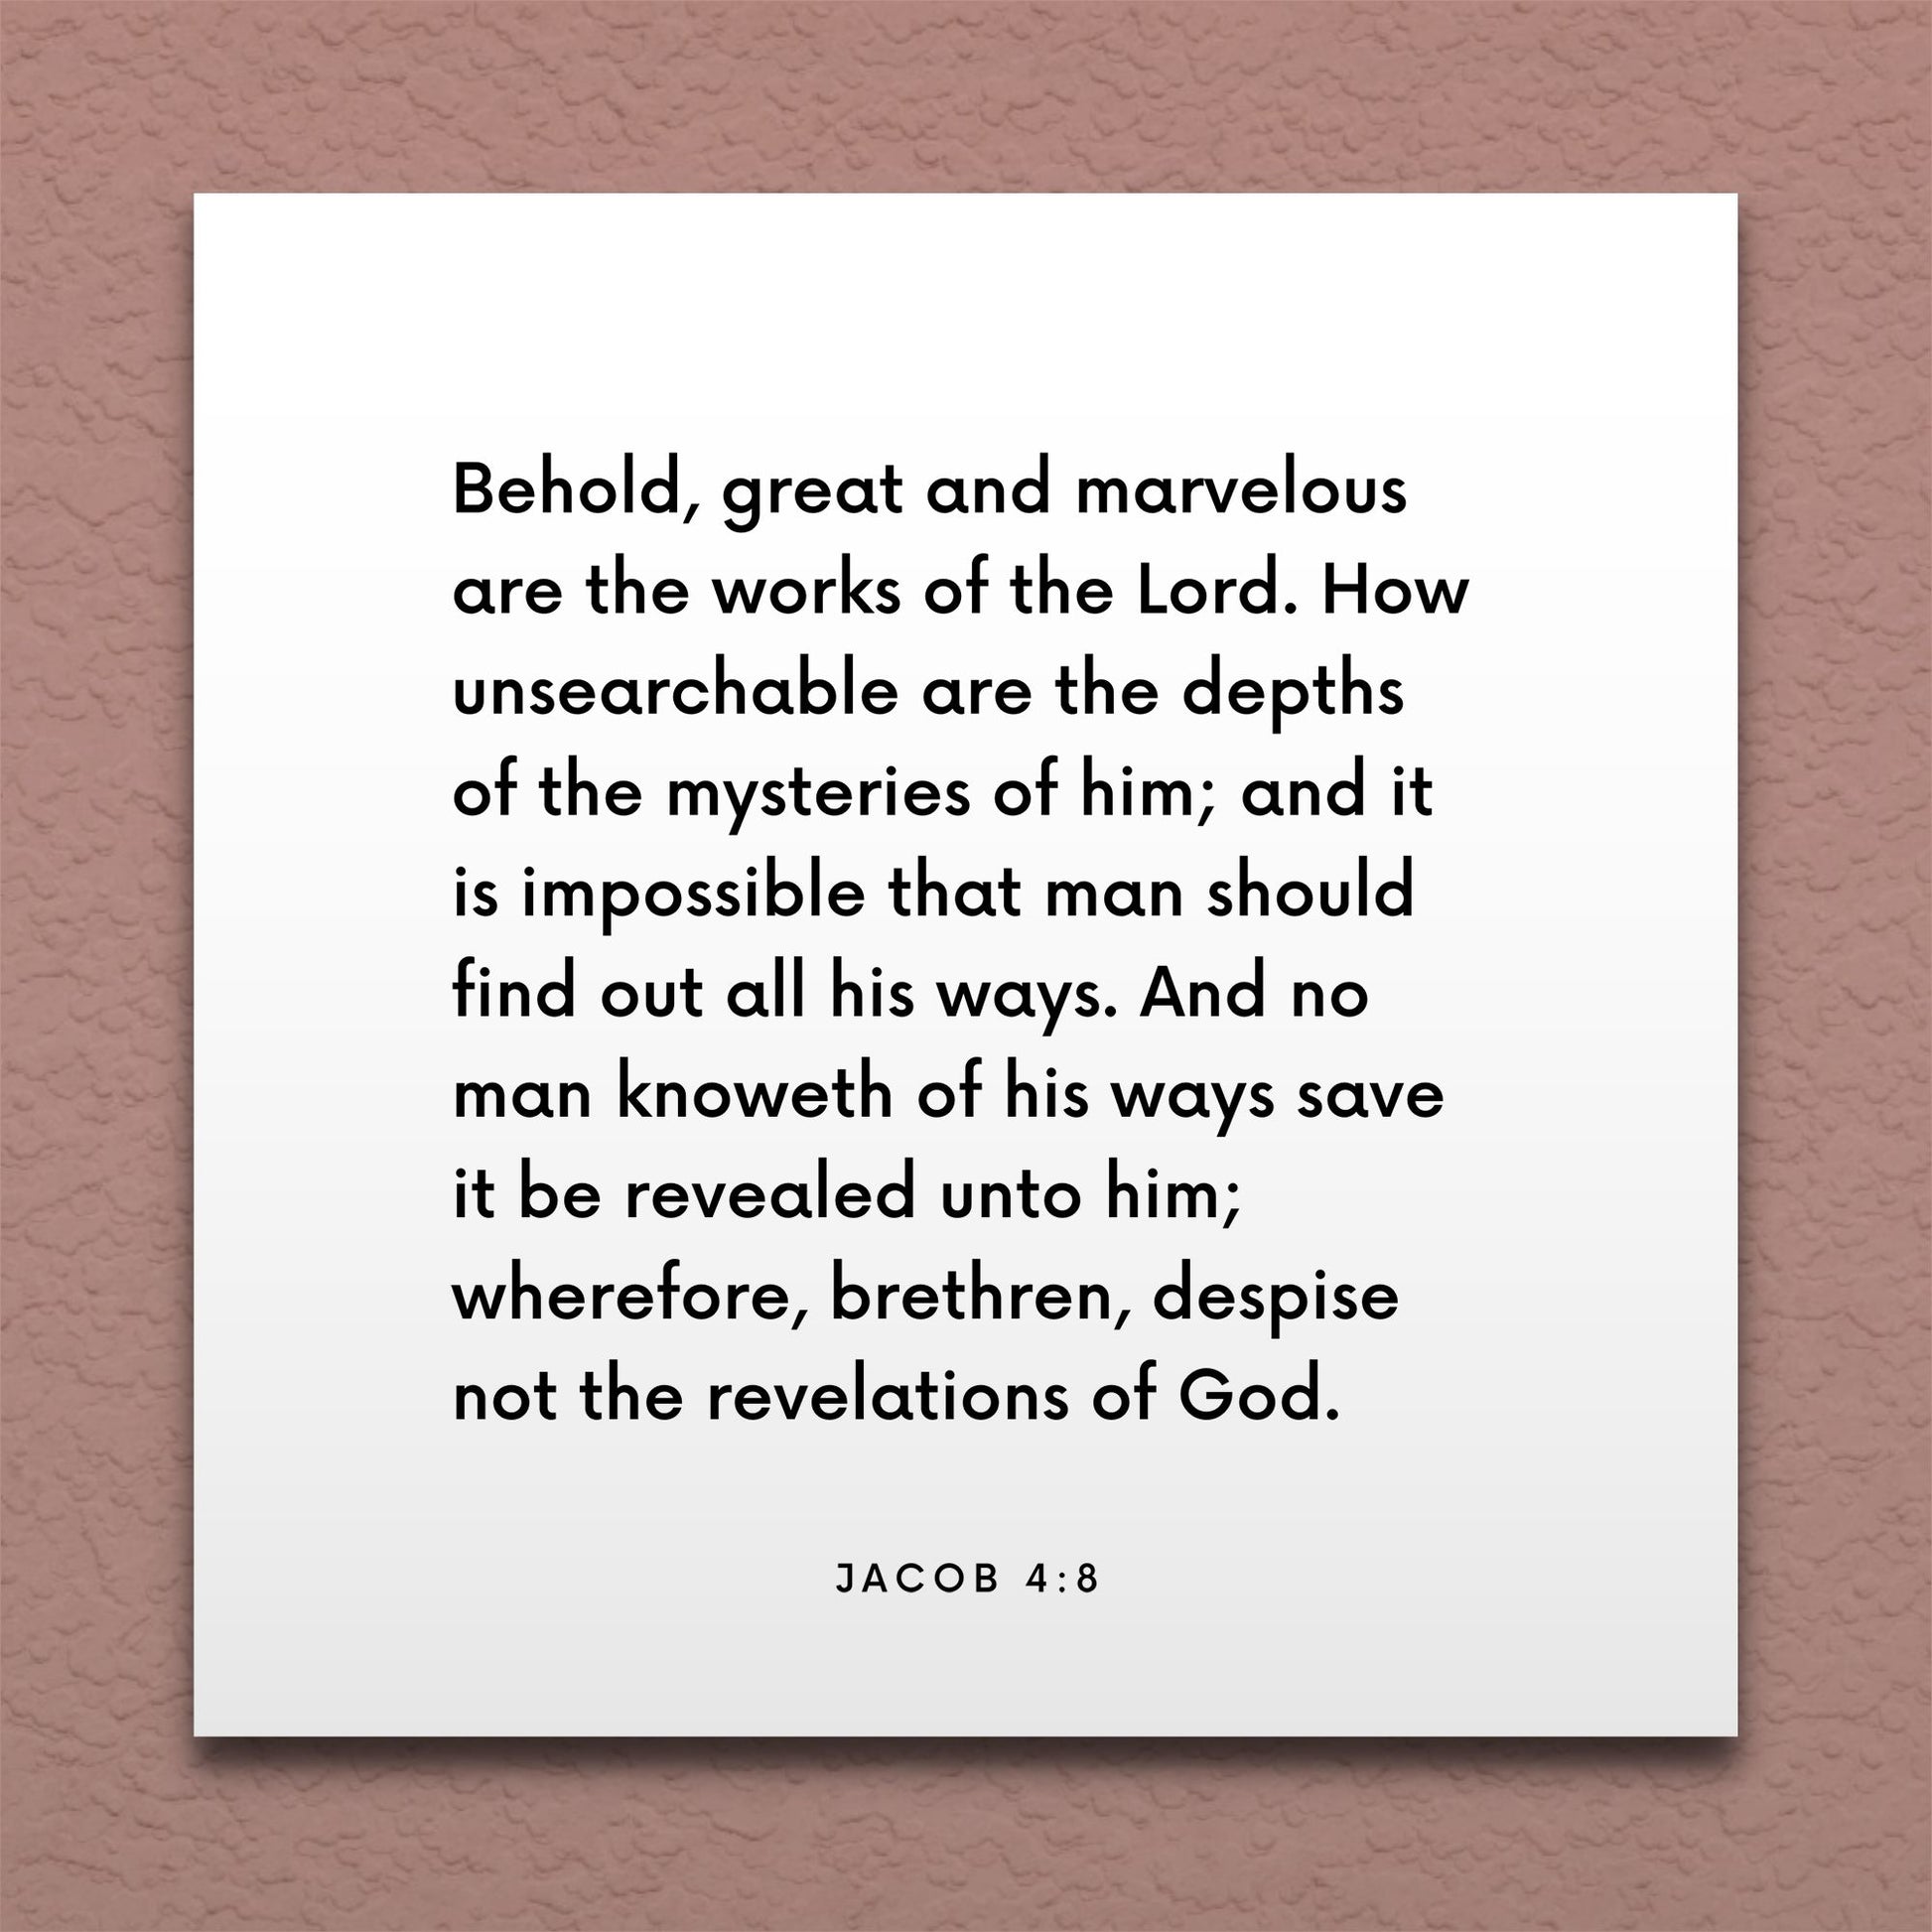 Wall-mounted scripture tile for Jacob 4:8 - "Great and marvelous are the works of the Lord"